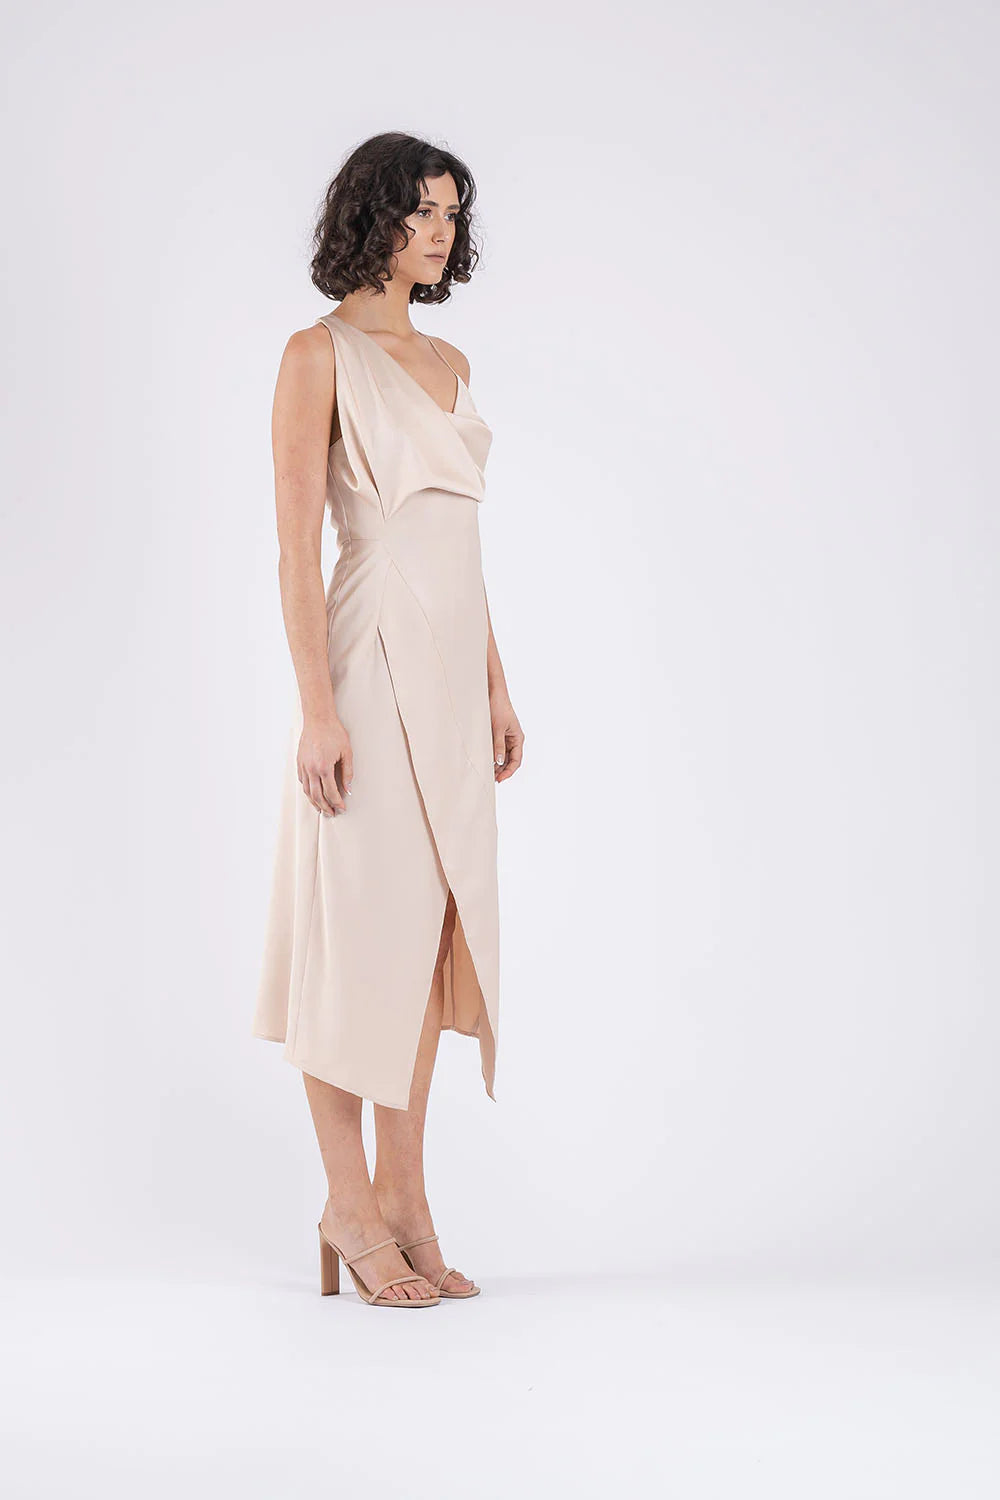 One Fell Swoop Muse Dress, Magnolia